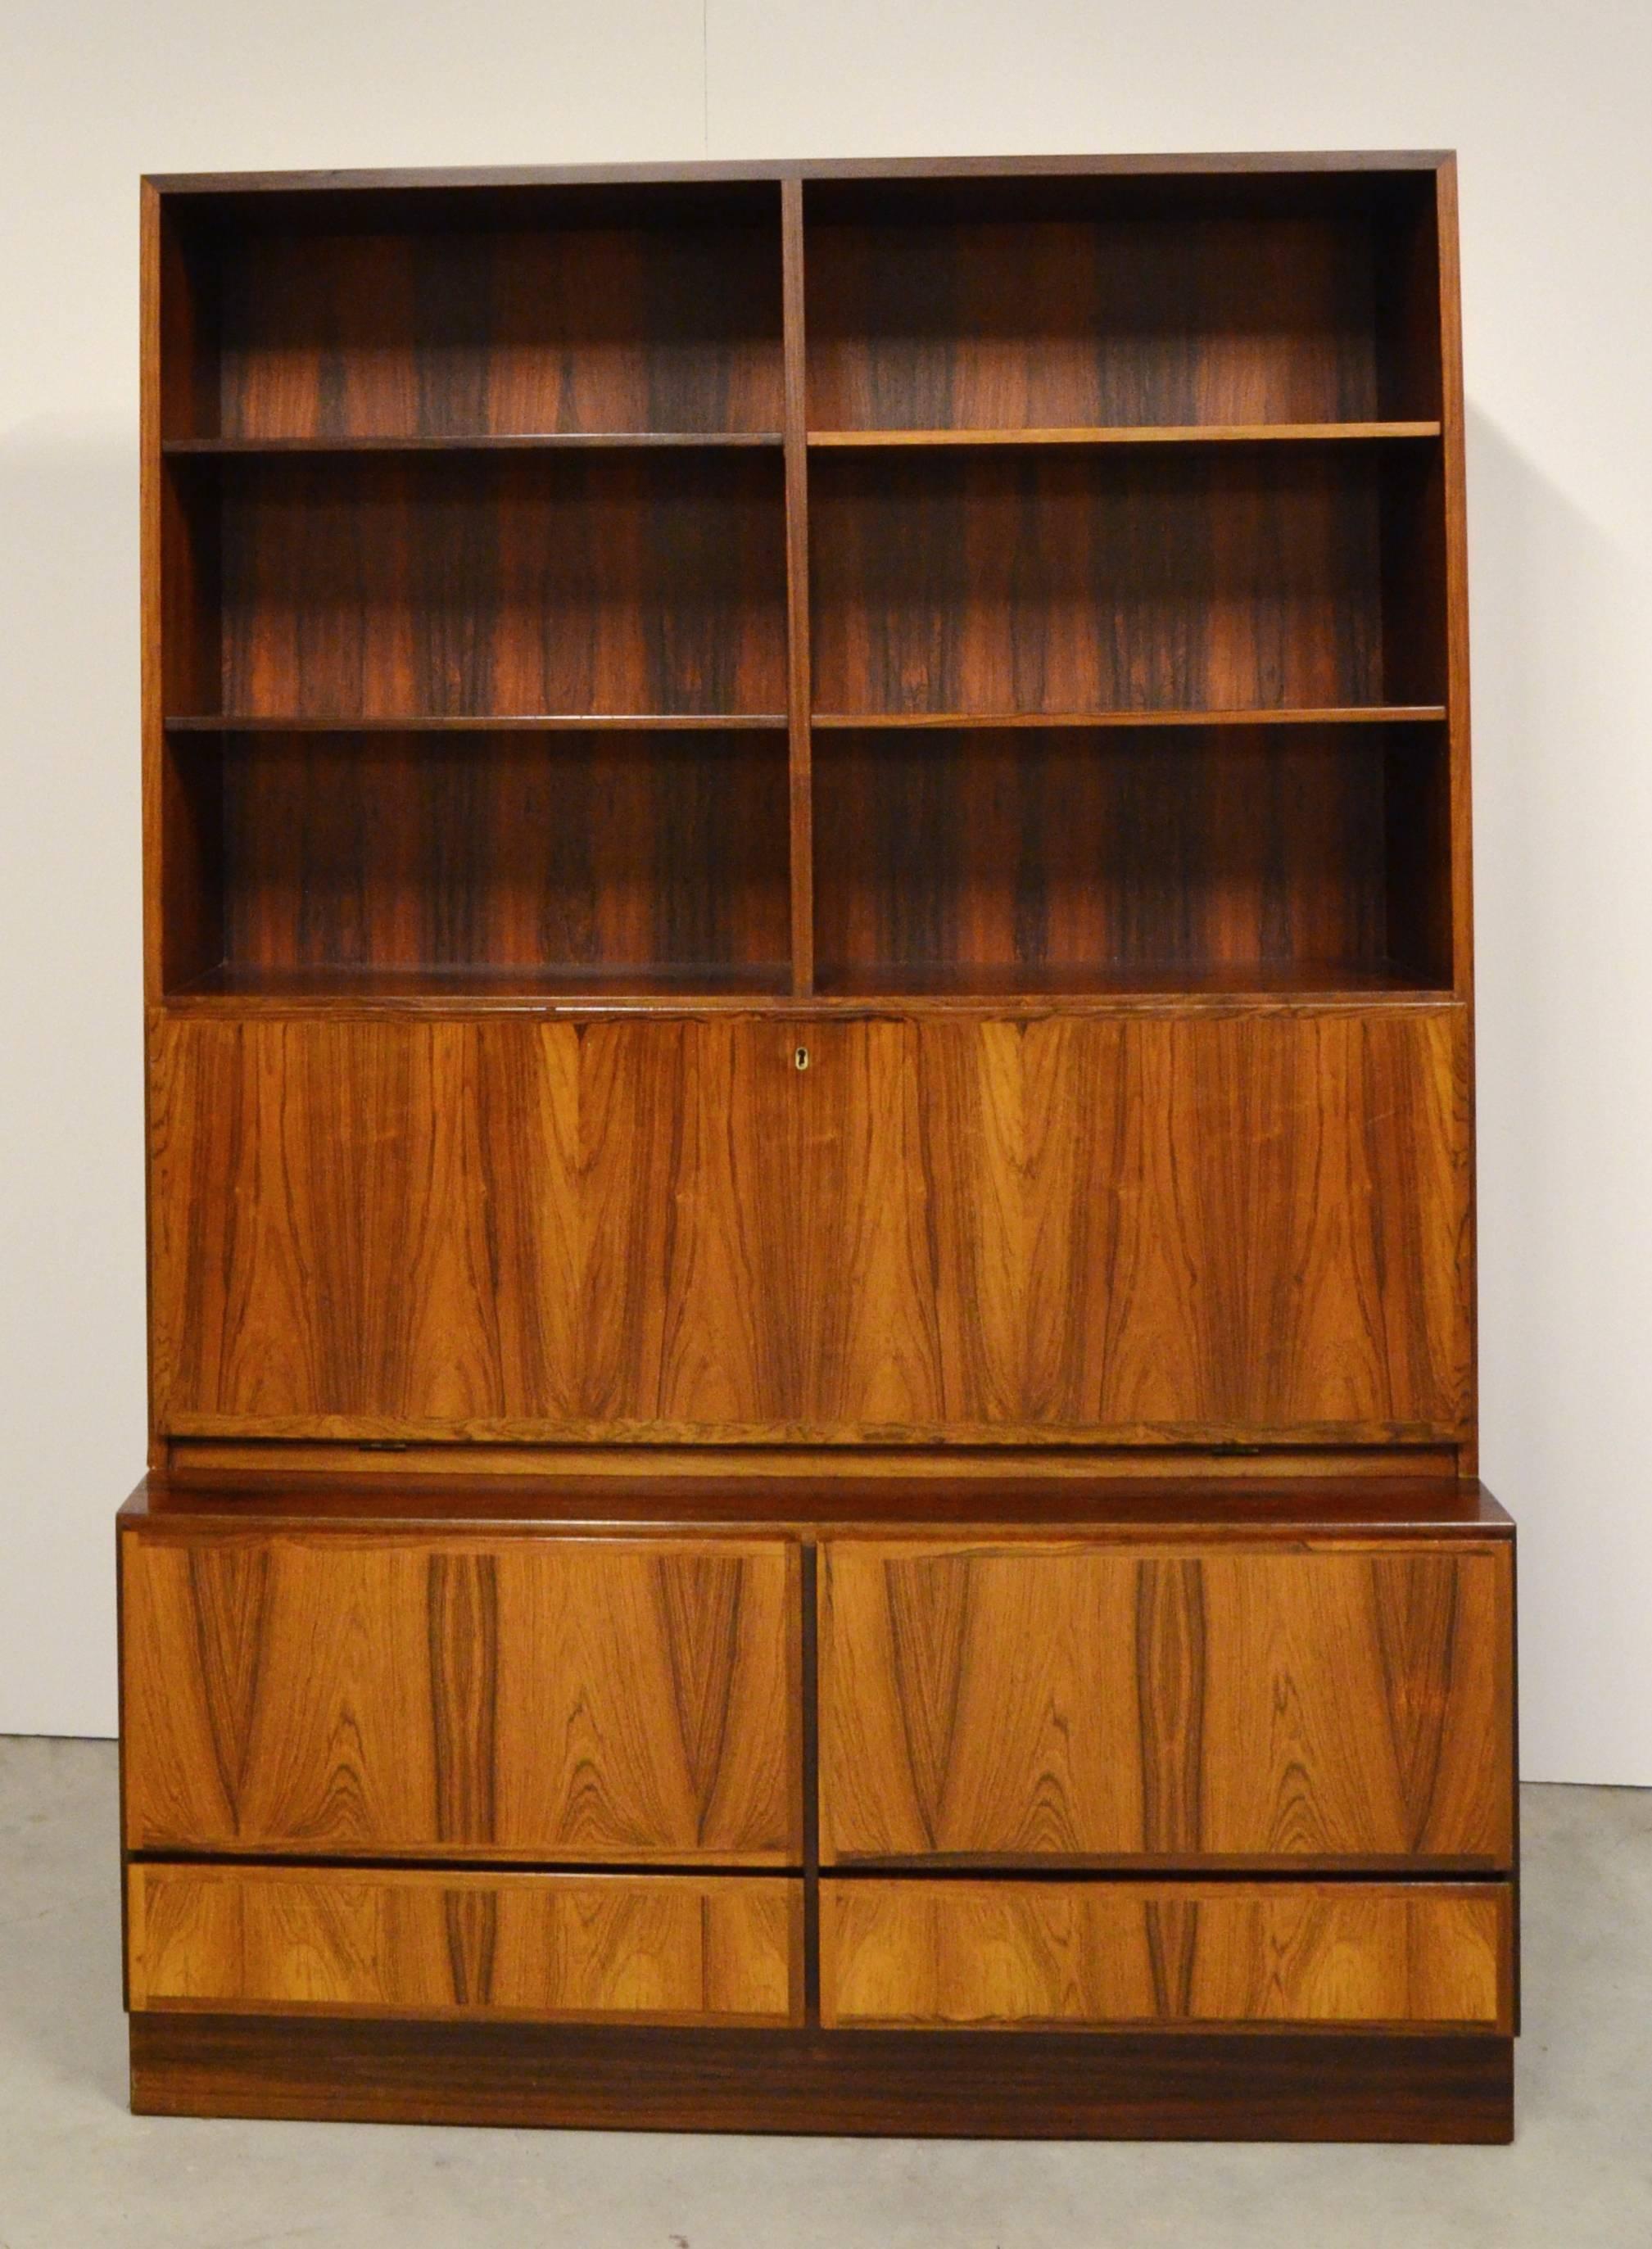 Mid-Century Modern cabinet by Omann Jun Furniture, Denmark, the upper section open has adjustable height shelves over a long hinged door dropping to reveal a fitted interior with shelves and drawers. The lower cabinet has two large drawers over two